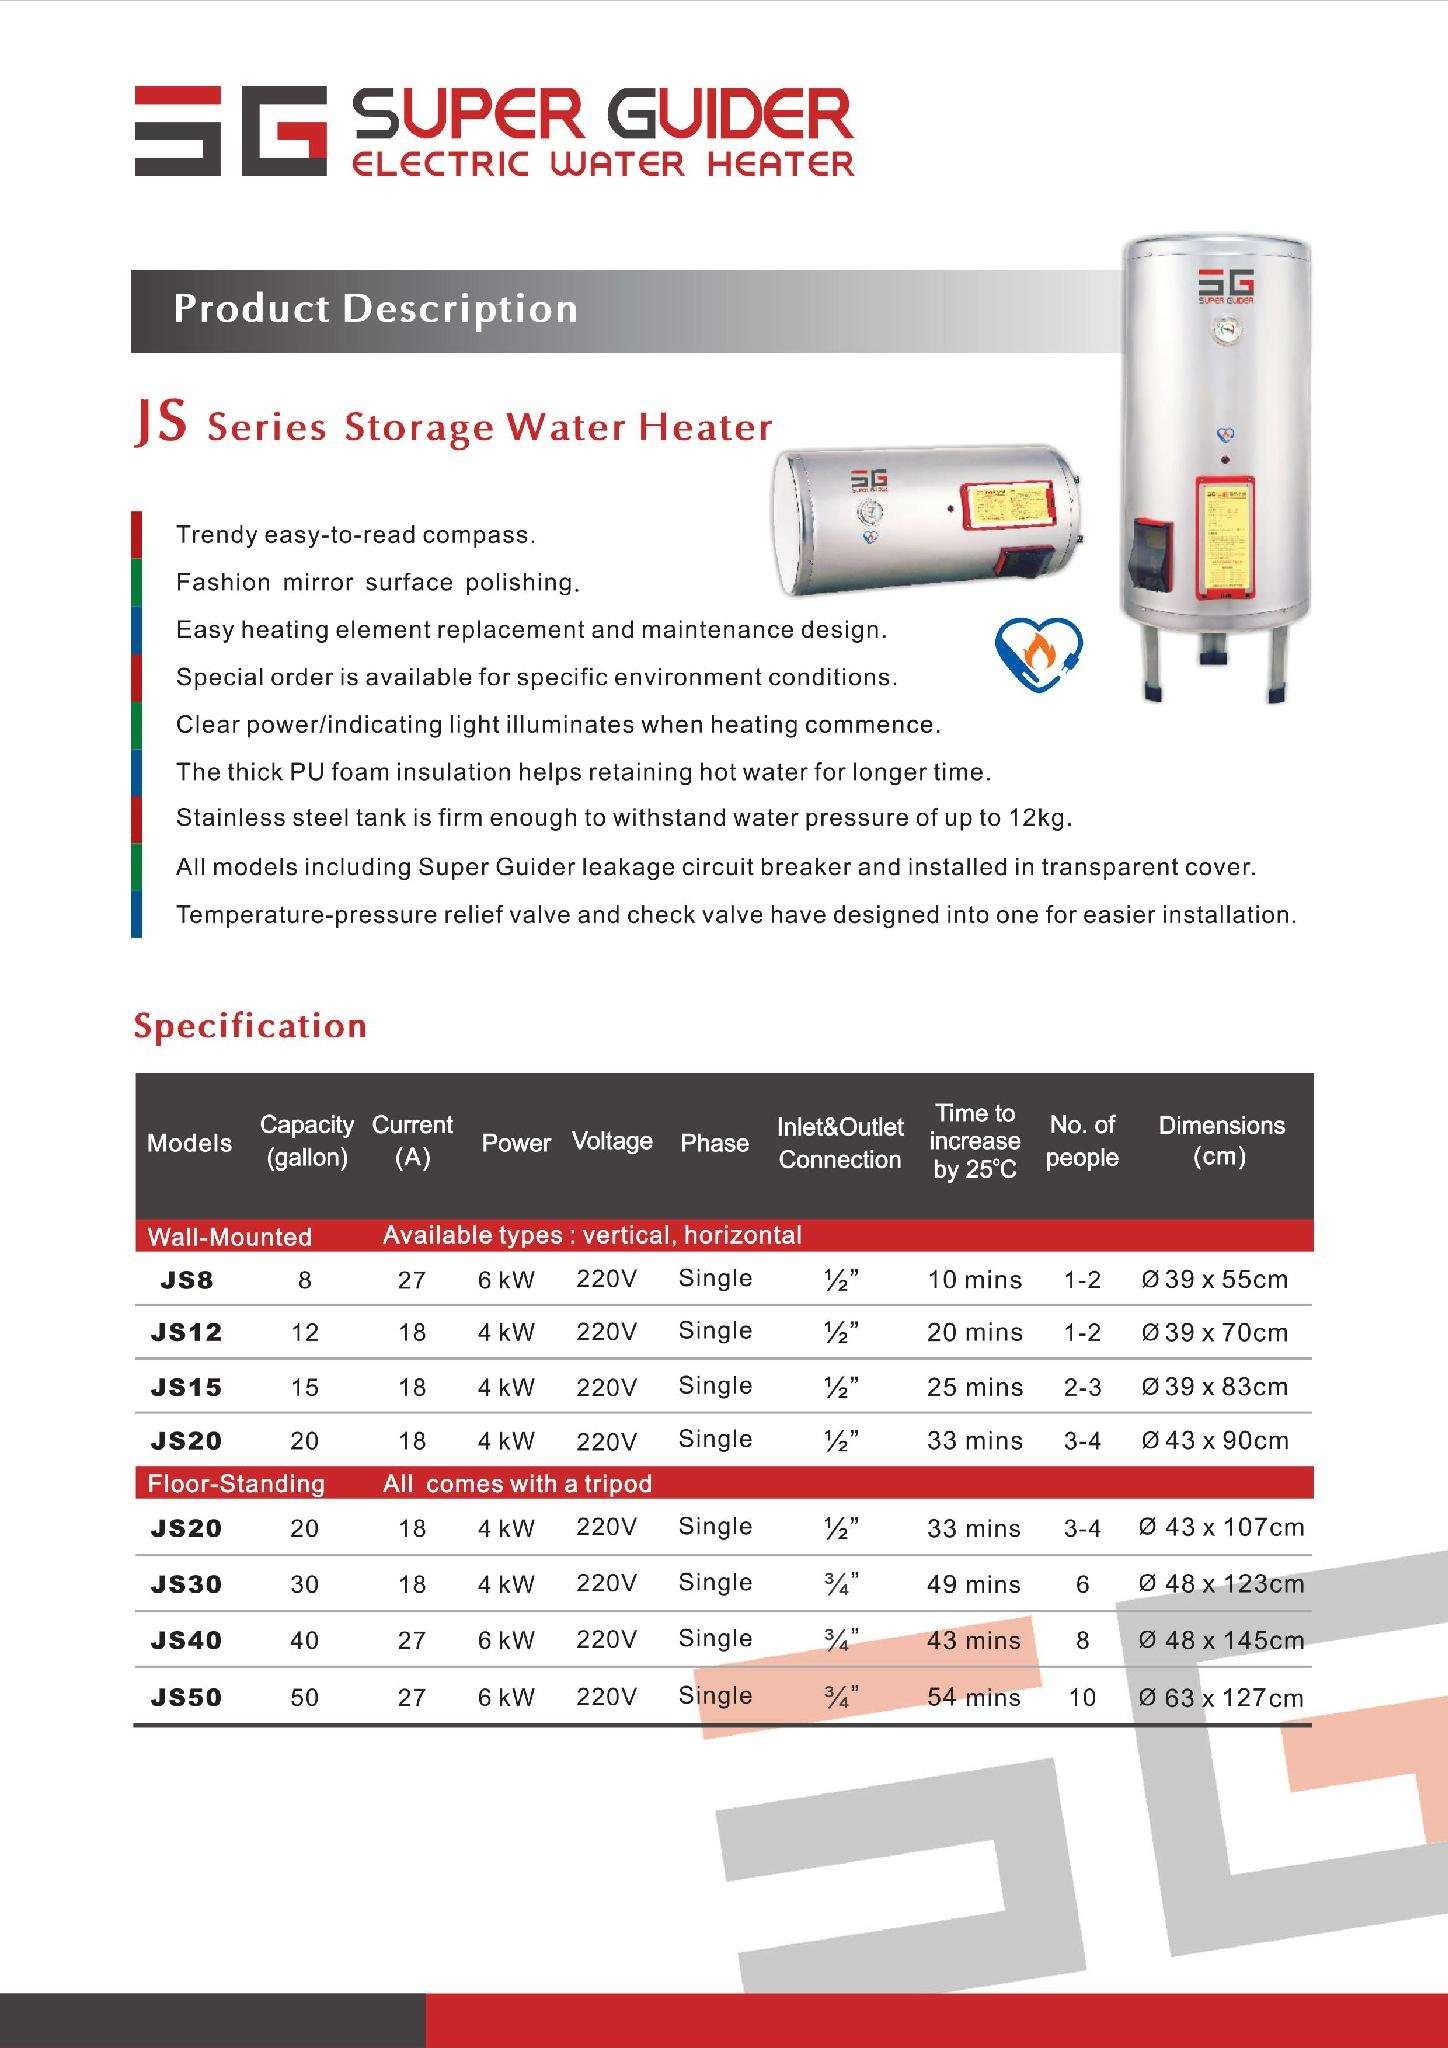 Super Guider Electric Water Heater Horizontal-Wall Series JS8-BW 2